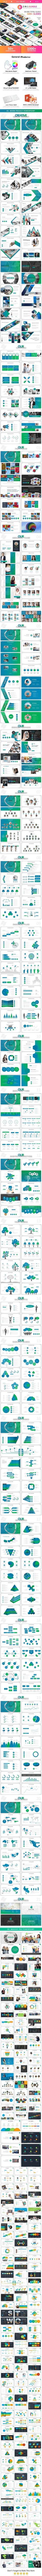 GraphicRiver 2 in 1 Pitch Deck Bundle Powerpoint 21170476